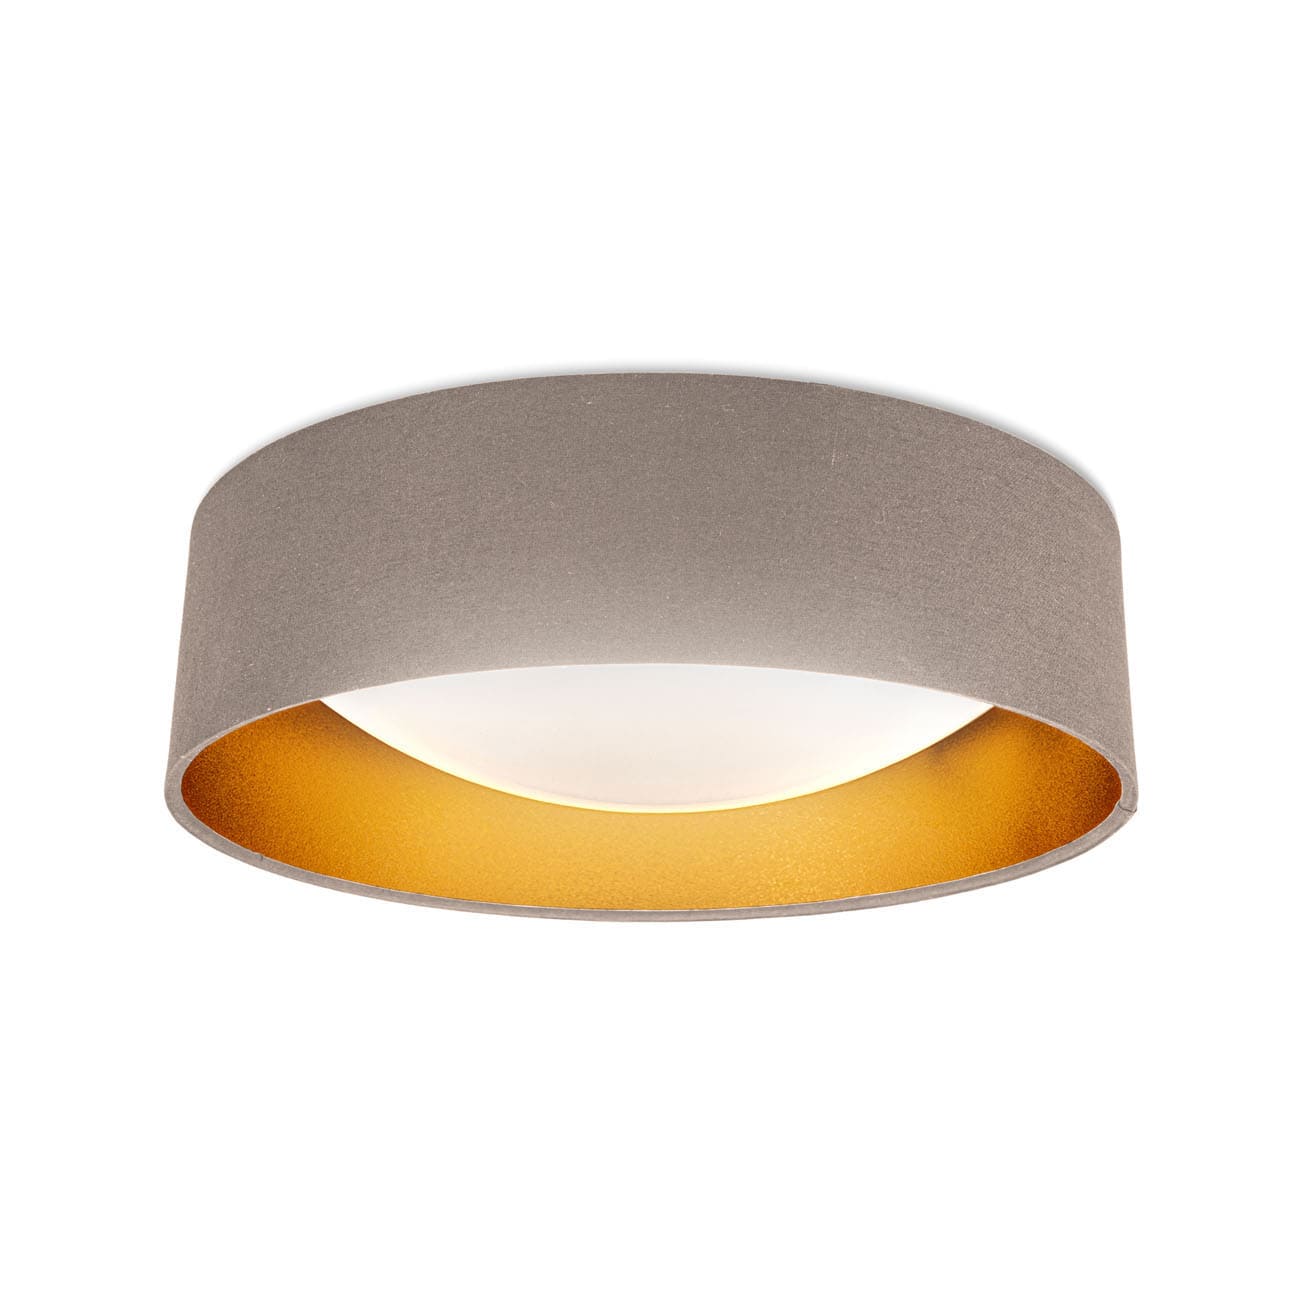 LED Stoffdeckenleuchte taupe-gold - 1